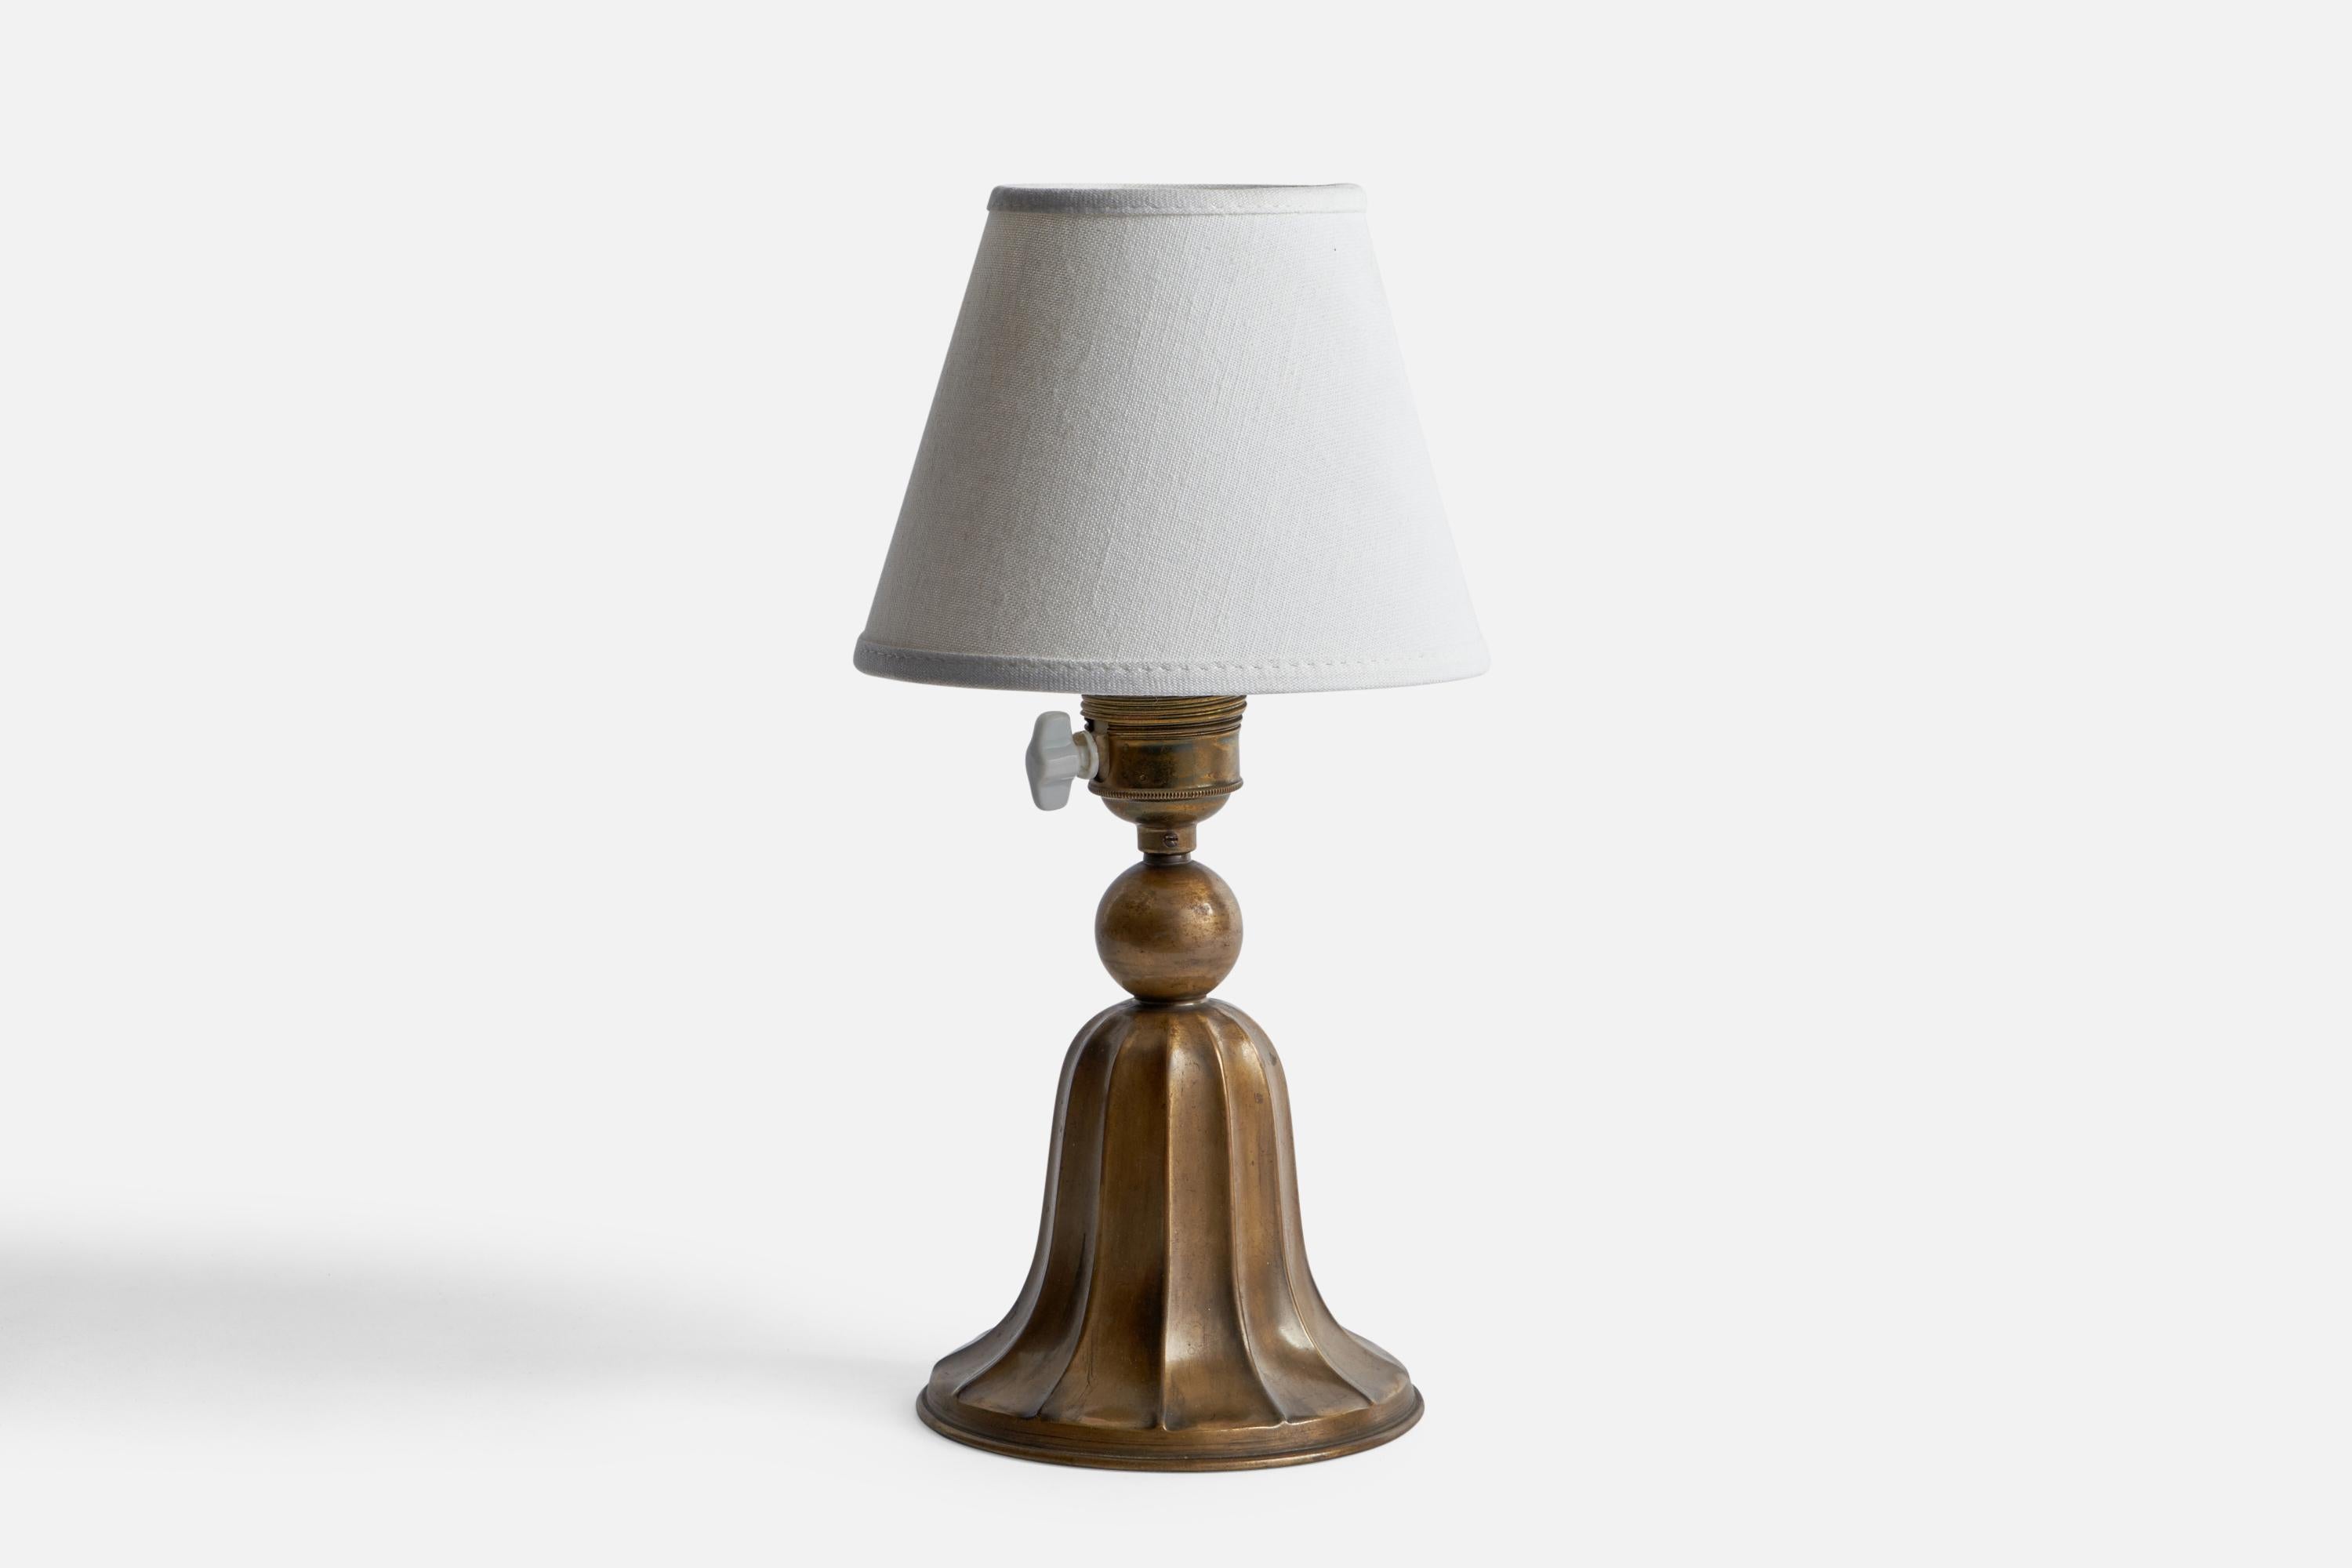 A small bronze table lamp designed and produced in Sweden, 1930s.

Dimensions of Lamp (inches): 8.25” H x 4.75” Diameter
Dimensions of Shade (inches): 3” Top Diameter x 5.75” Bottom Diameter x 4.5” H
Dimensions of Lamp with Shade (inches): 11” H x